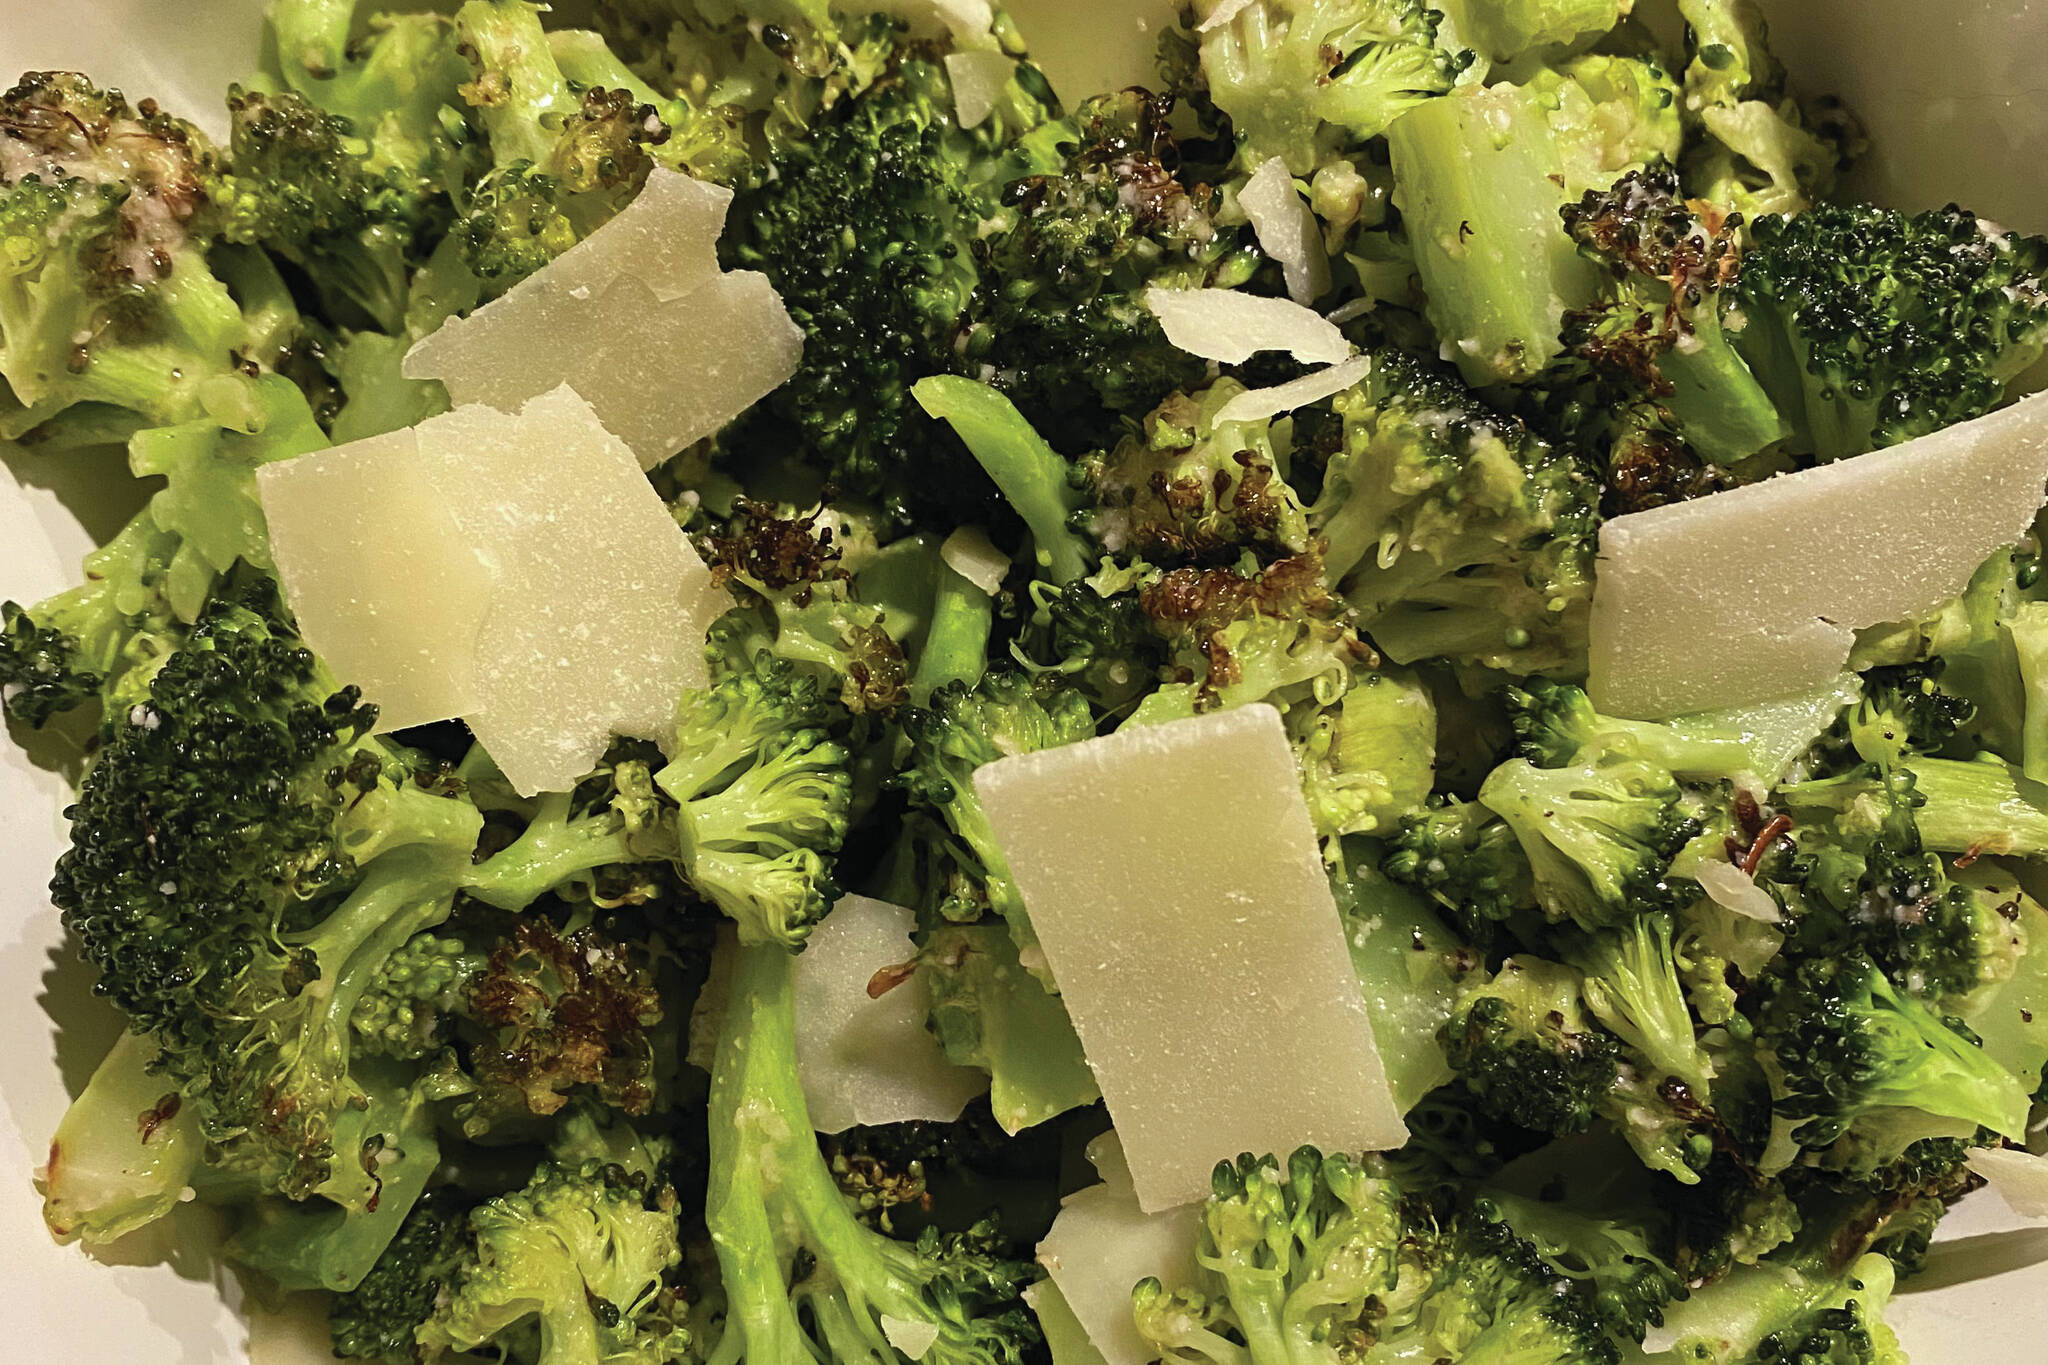 Roasted broccoli Caesar salad provides some much-needed greens and fiber to balance out the rolls and gravy. (Photo by Tressa Dale/Peninsula Clarion)